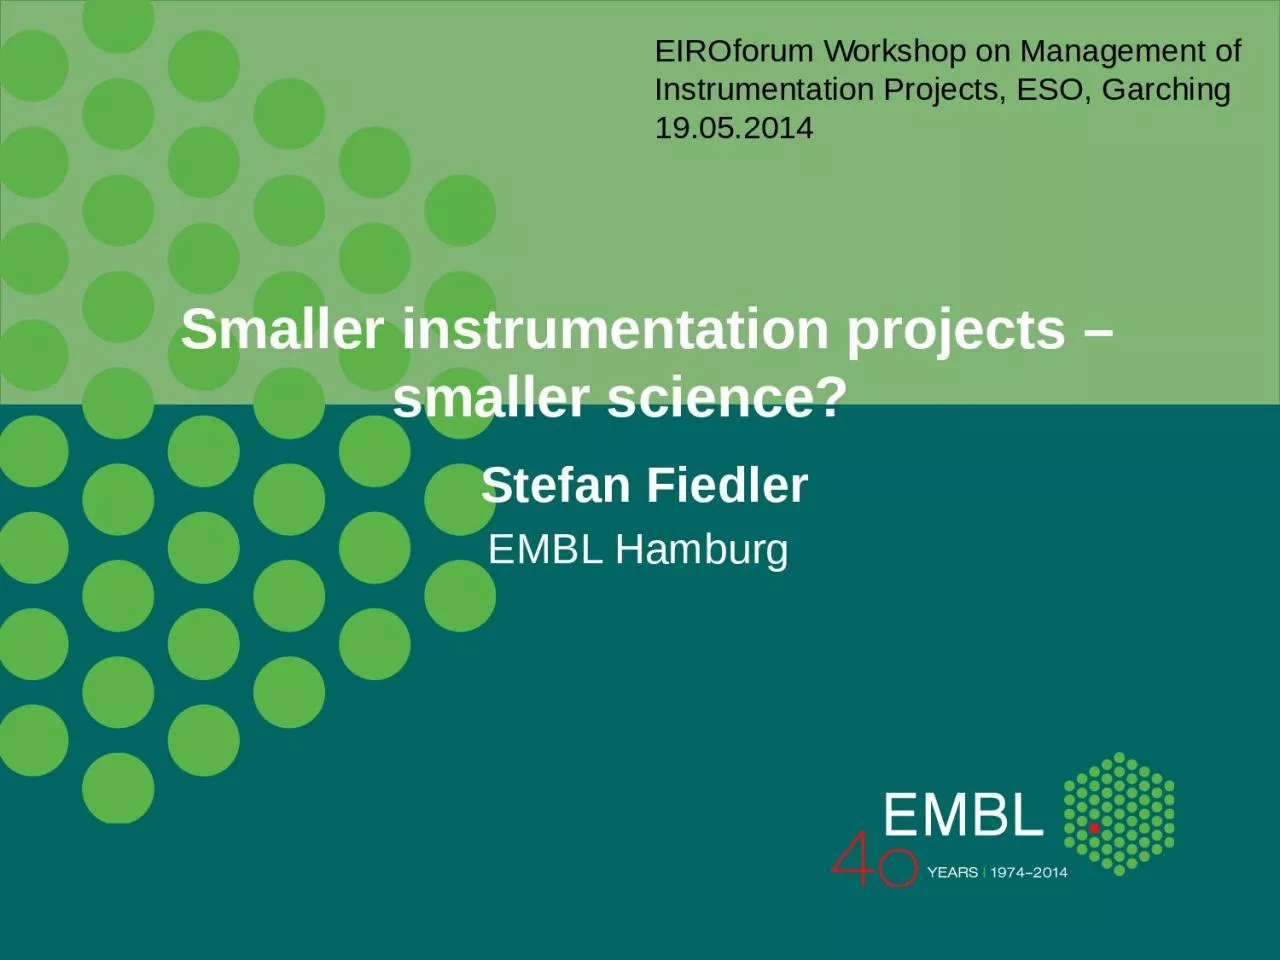 Smaller instrumentation projects – smaller science?